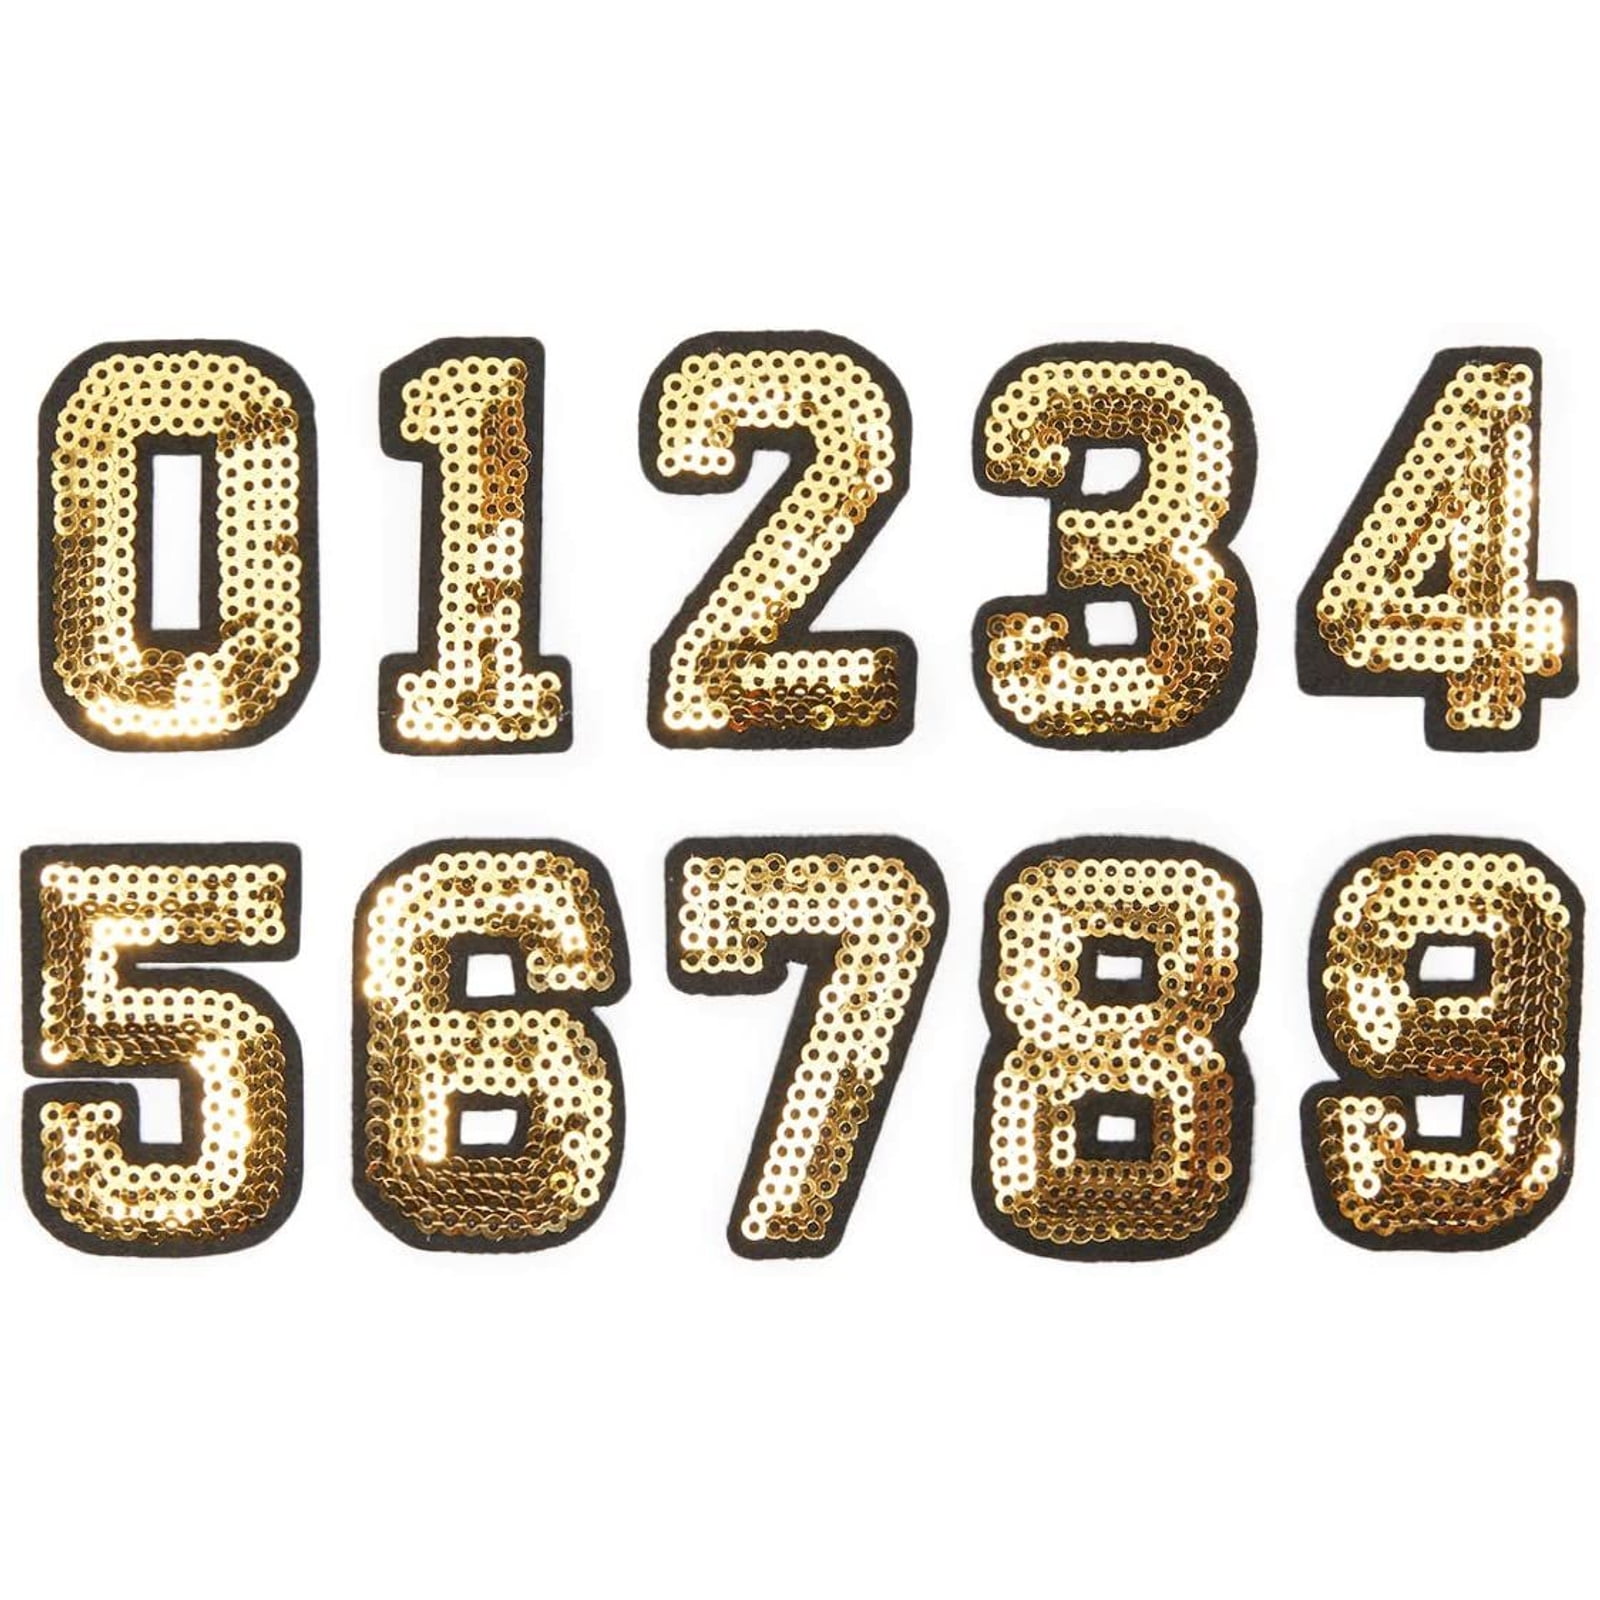 30 Pieces Numbers Patches Iron on Numbers Patches 0-9 Number Decorative Repair Patches Sew on Embroidered Applique Patches for Baseball Football